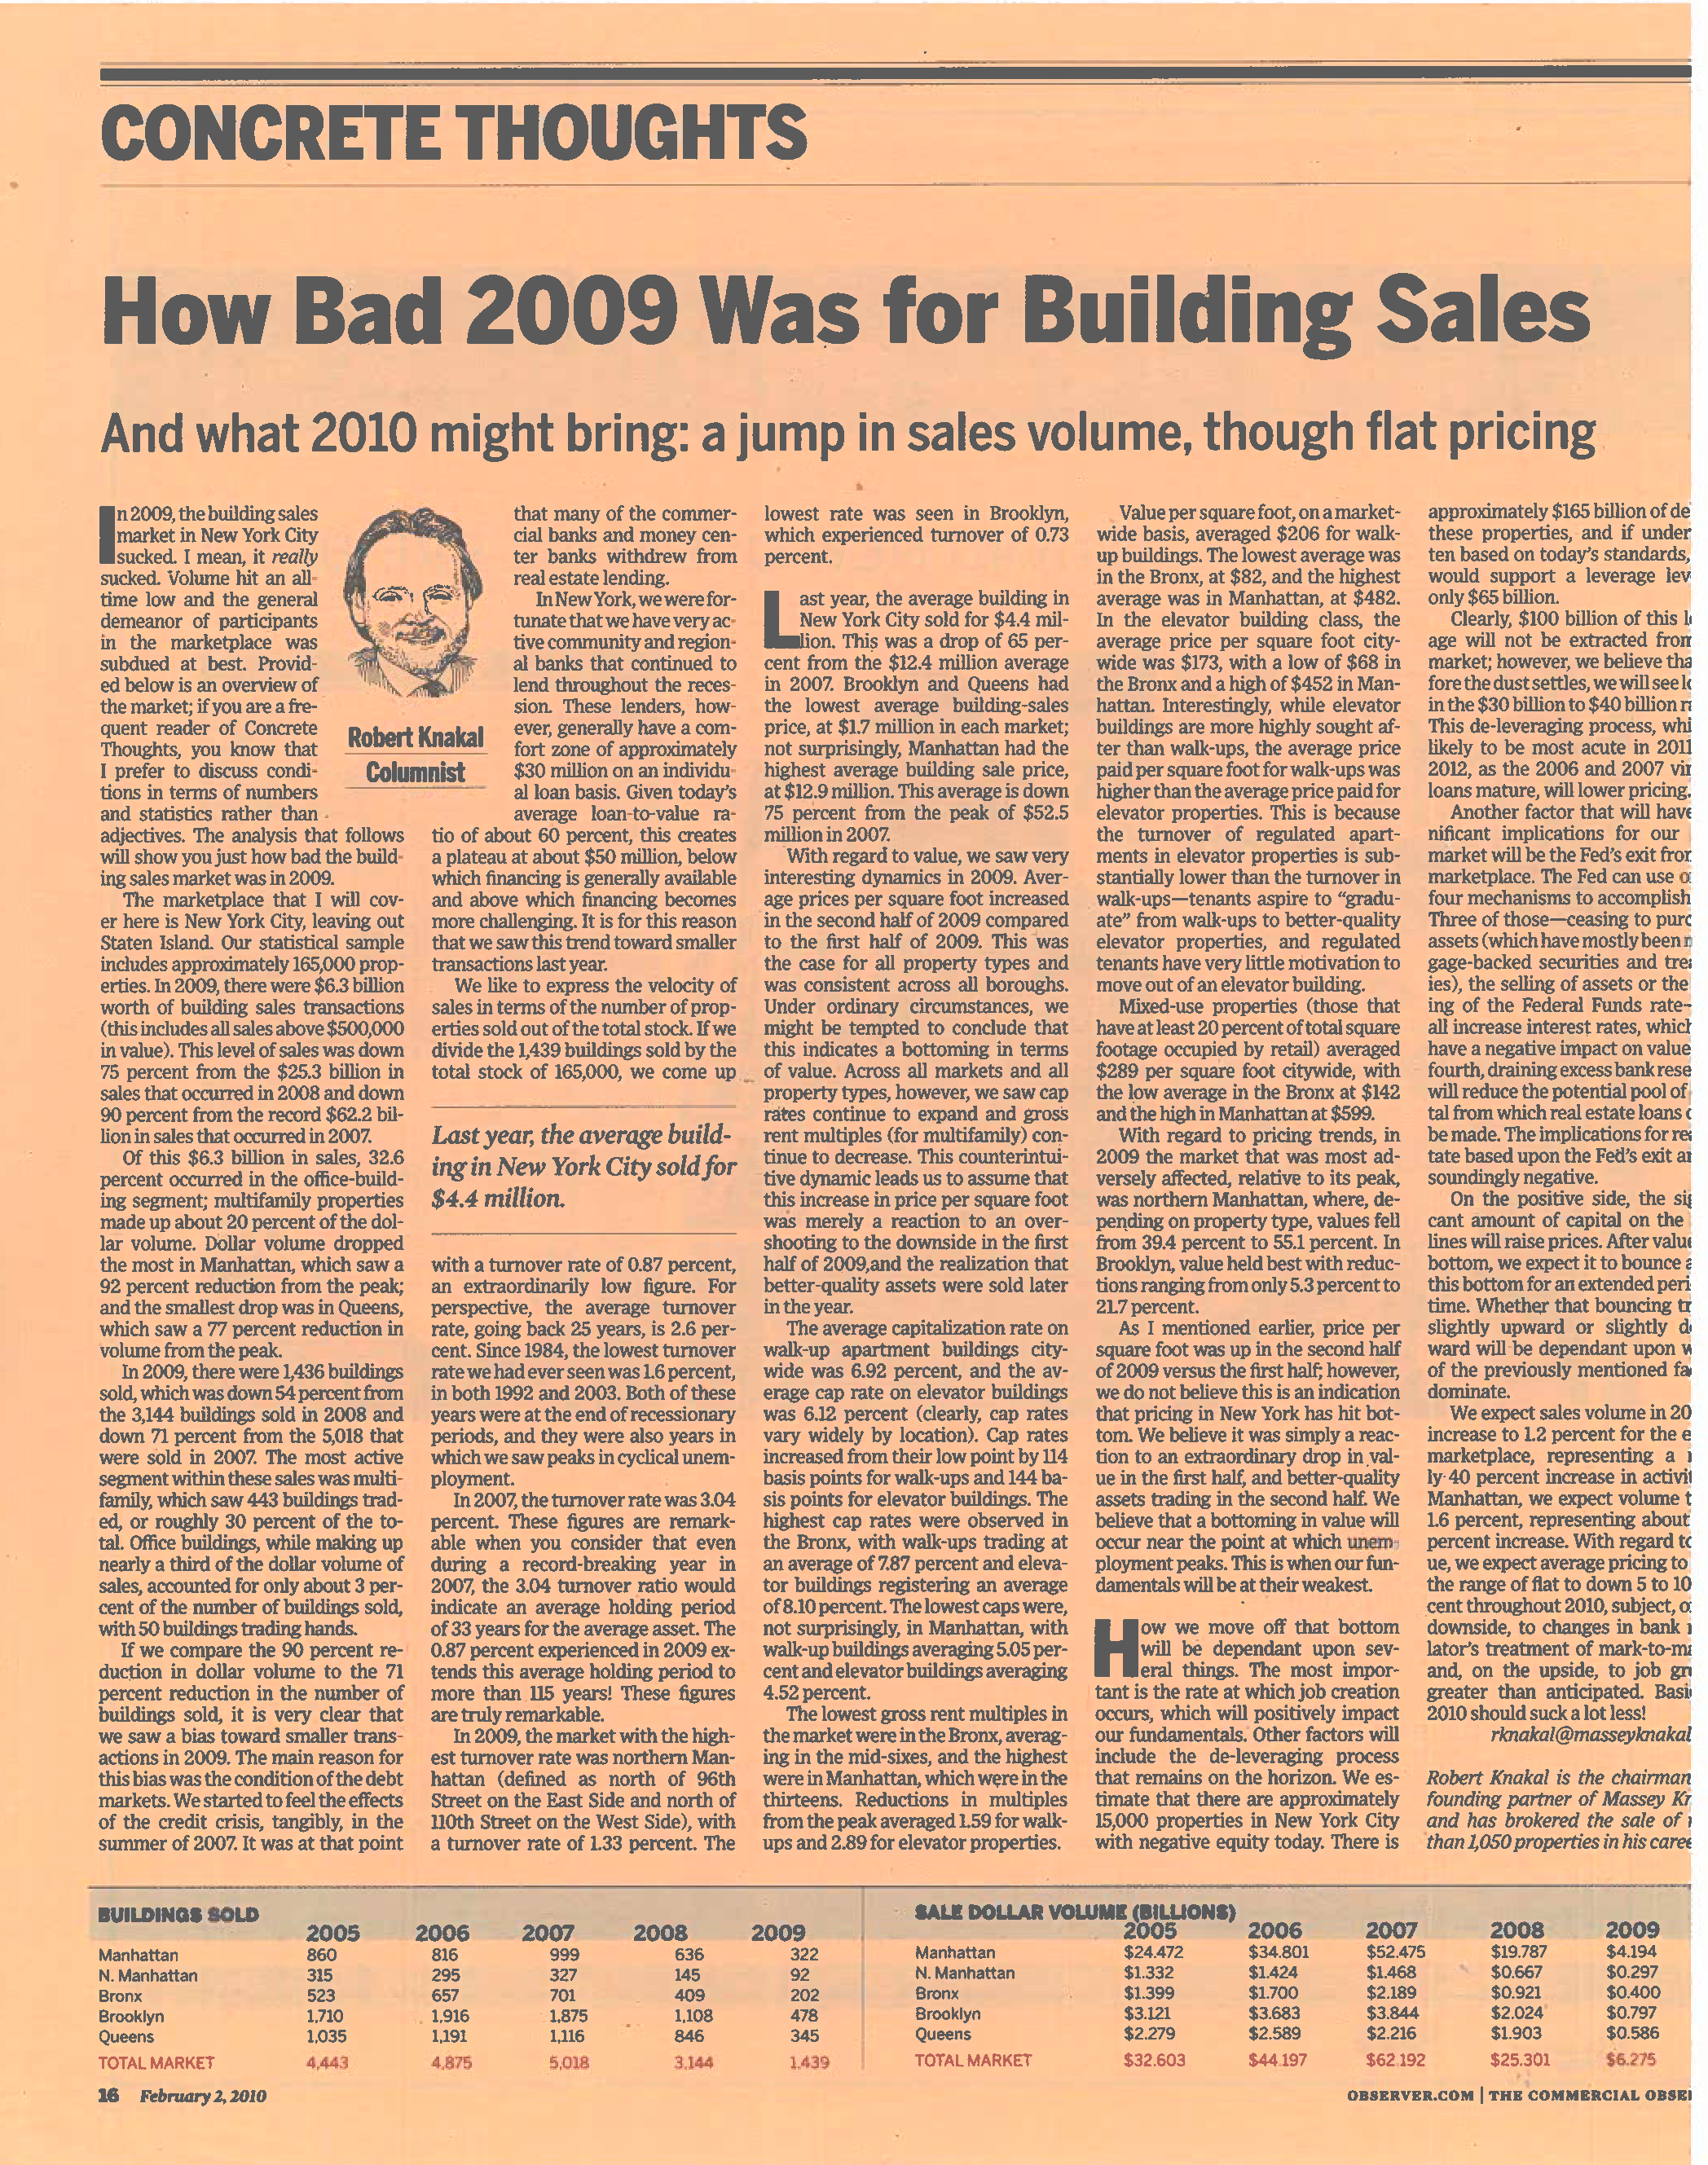 Concrete Thoughts - How Bad 2009 Was for Building Sales - Feb 2 2010